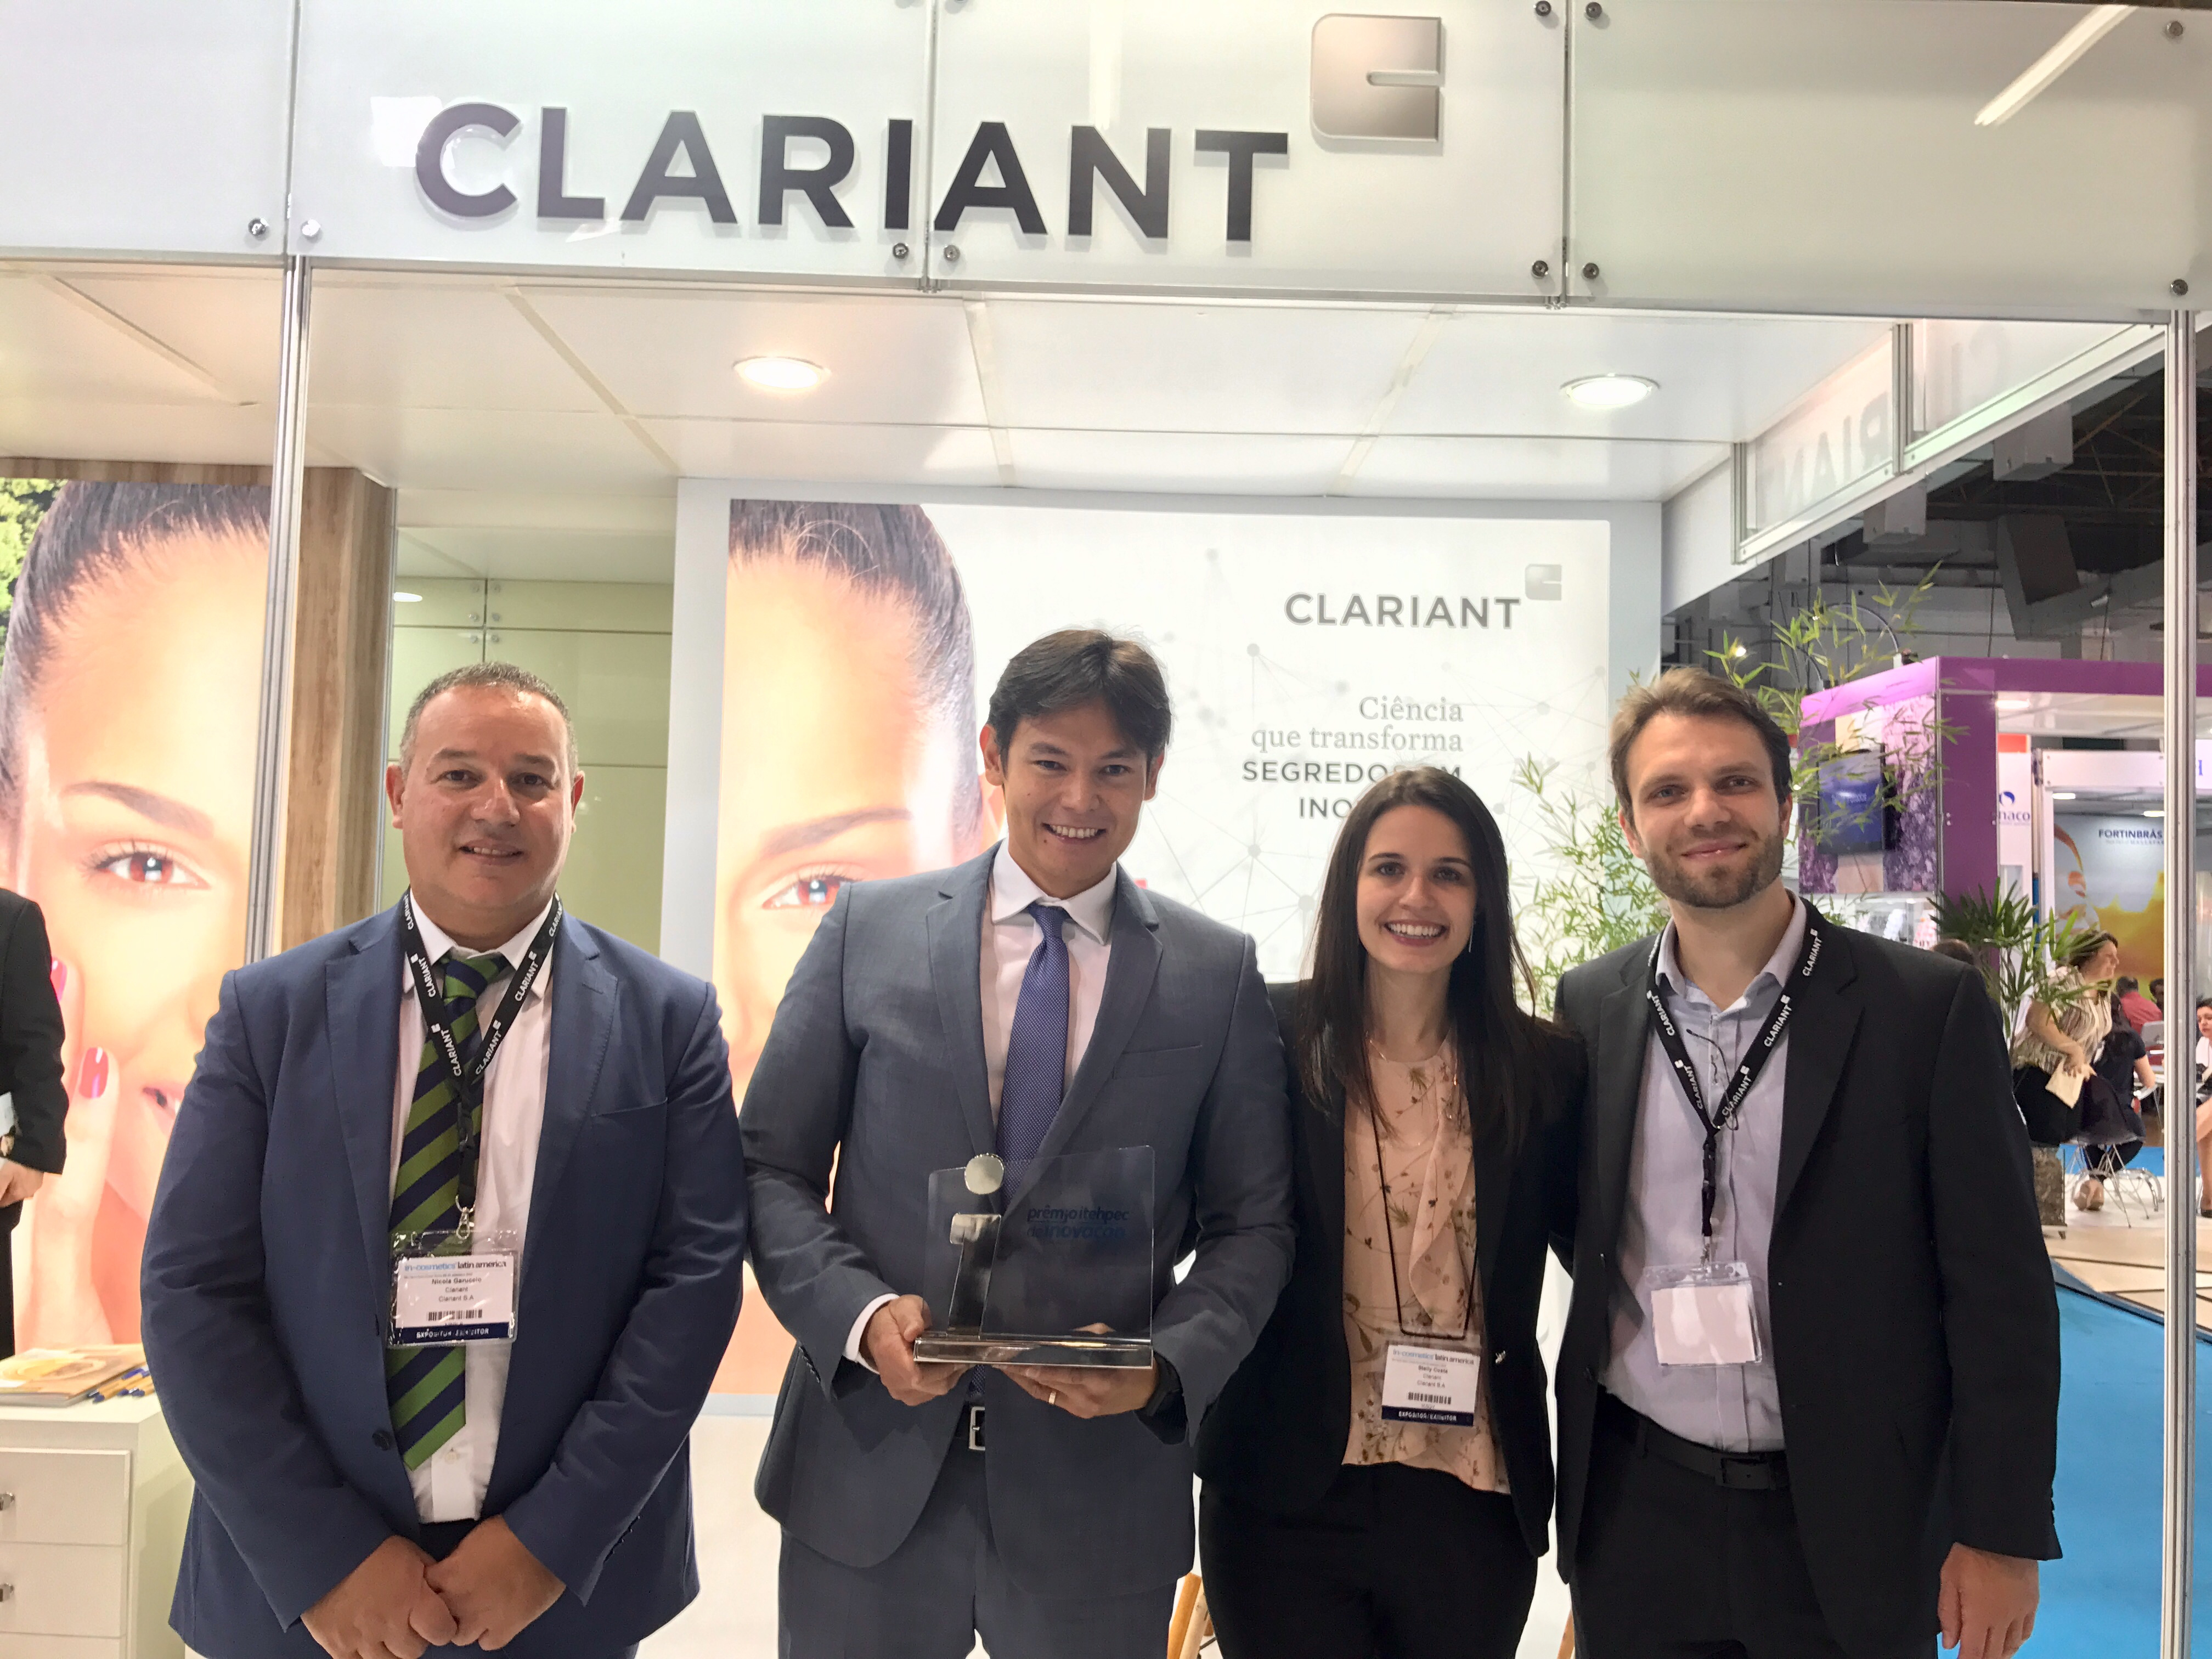 Clariant wins ITEHPEC Innovation Award at in-cosmetics Latin America 2017. (Photos: Clariant)